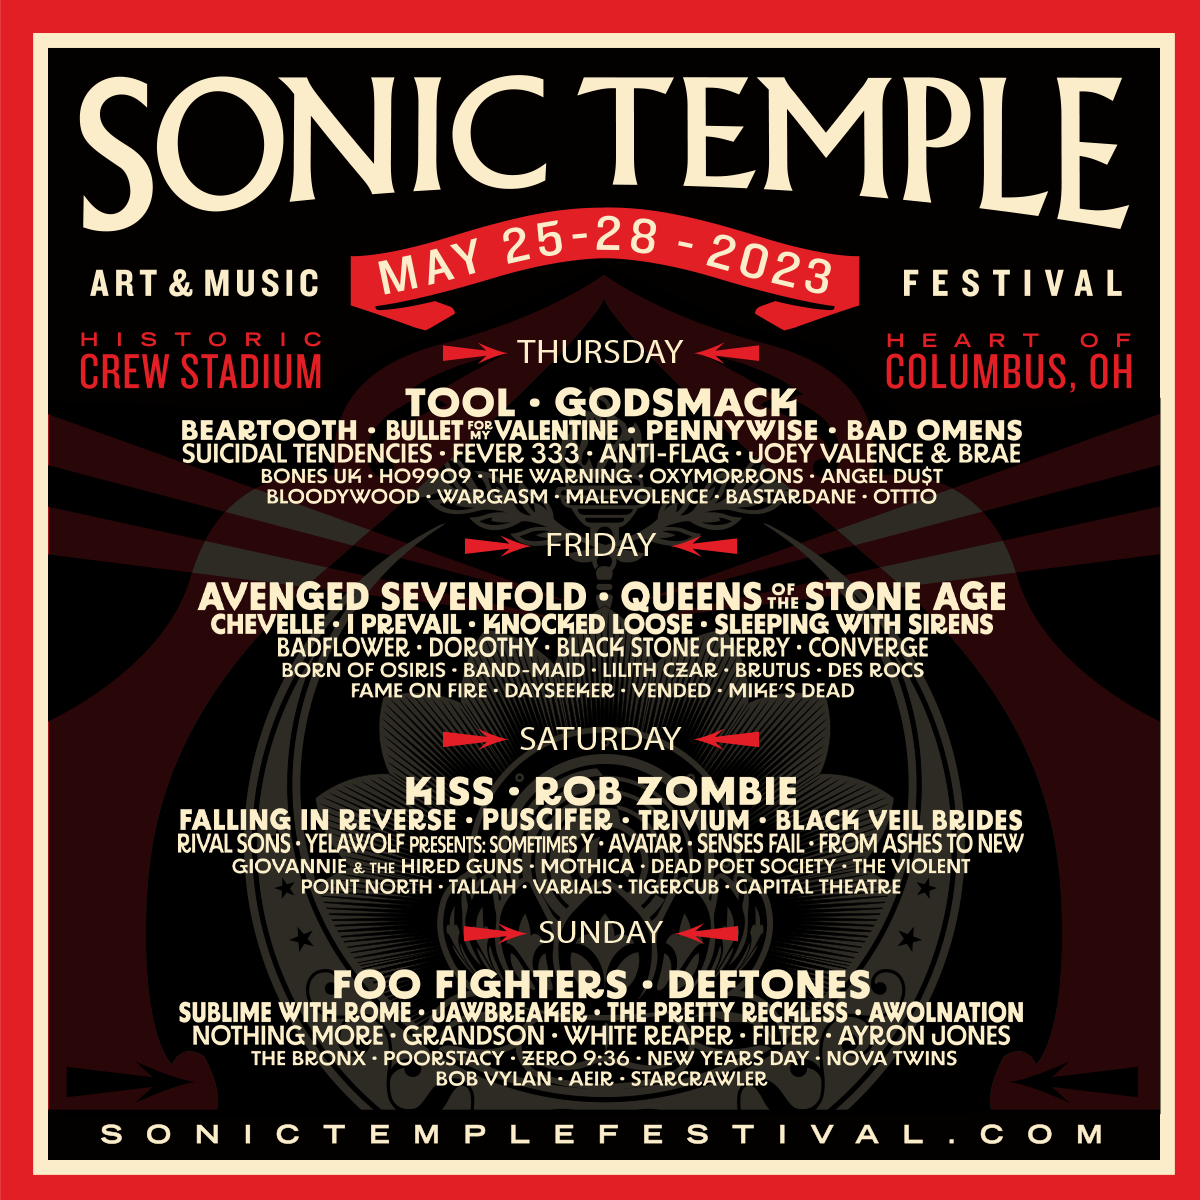 Sonic Temple Art & Music Festival: Tool, Avenged Sevenfold, Kiss & Foo Fighters - 4 Day Pass at Nothing More Concert